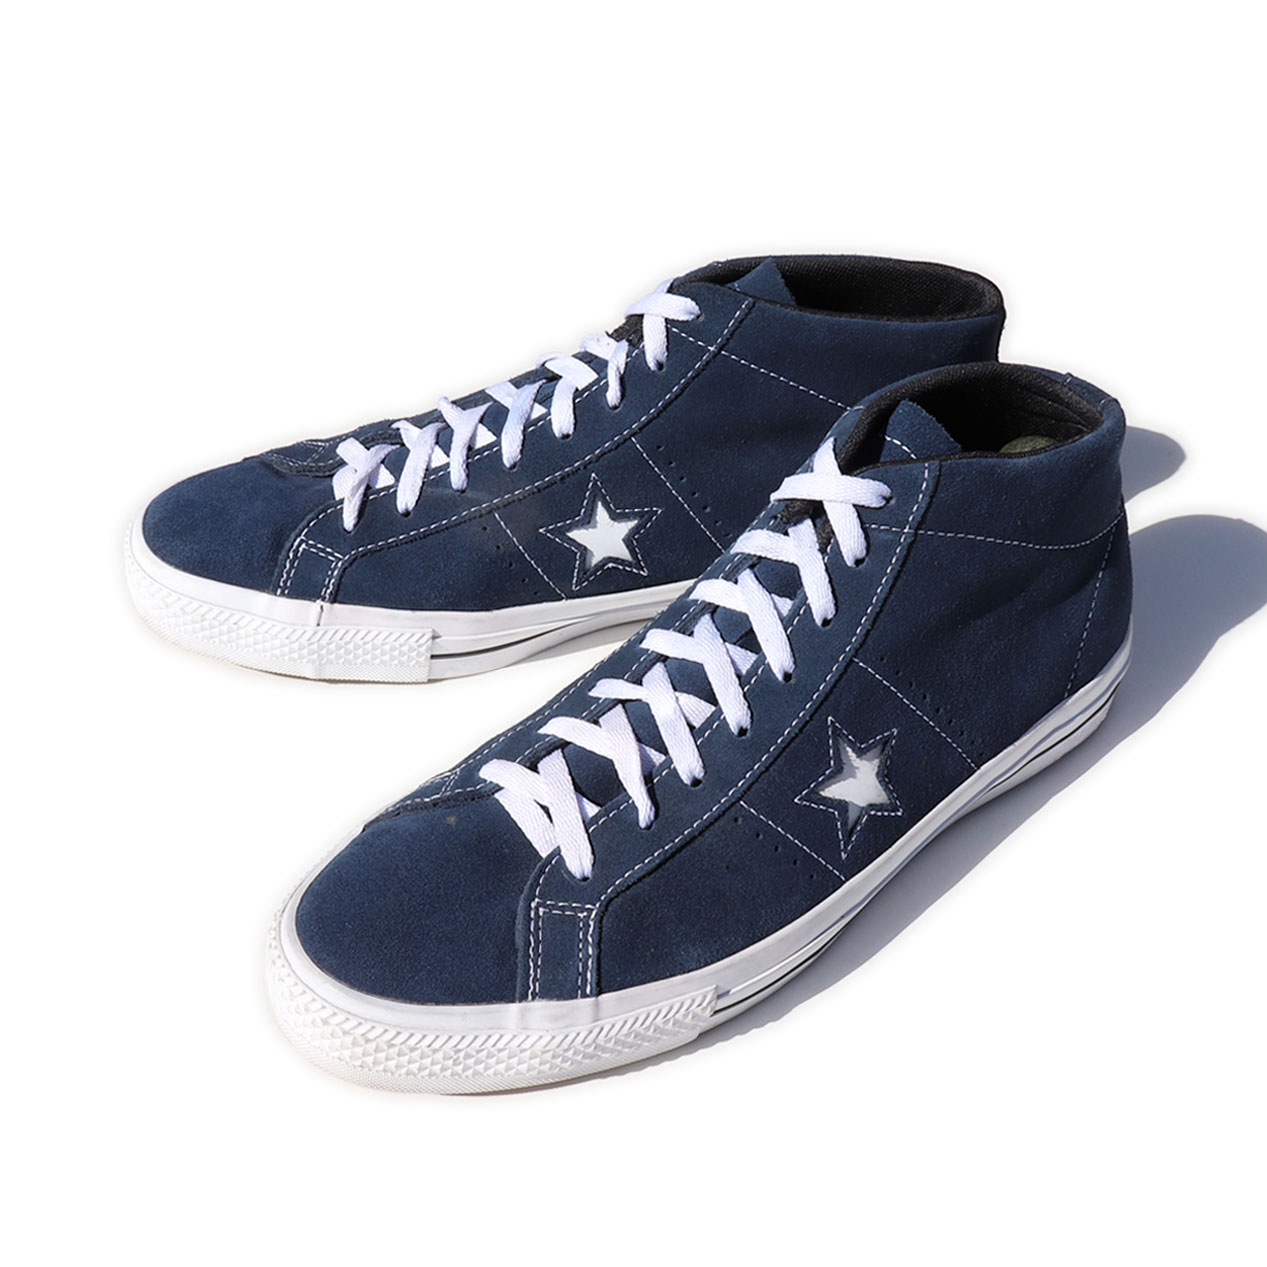 POST JUNK / CONVERSE ”CONS ONE STAR PRO SUEDE MID” スニーカー [29.5cm]